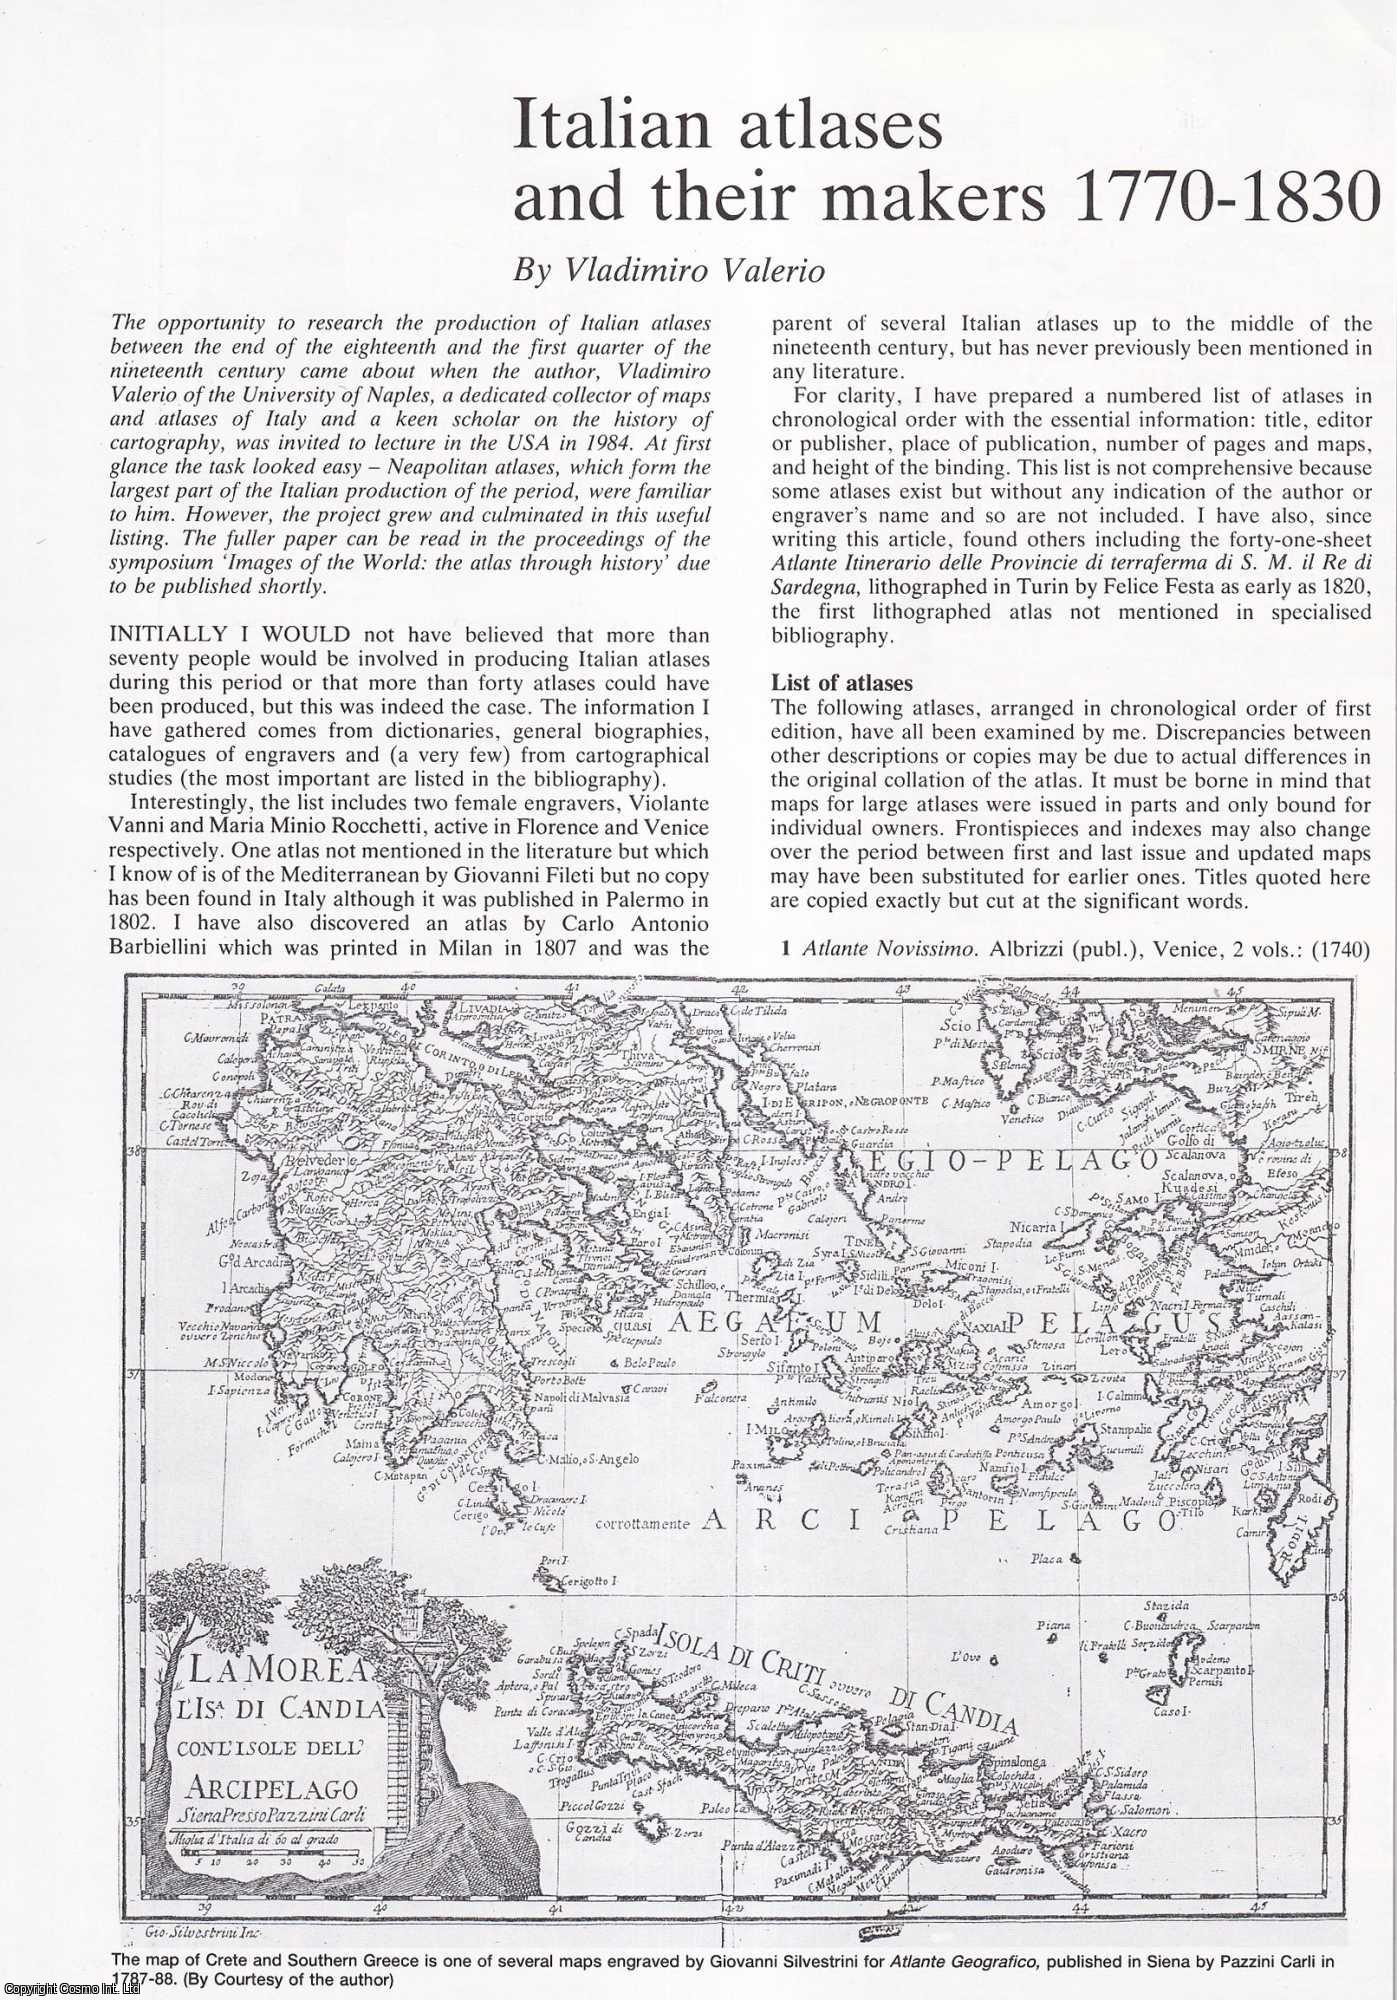 Vladimiro Valerio - Italian Atlases and their Makers 1770-1830. An original article from Map Collector Magazine, 1988.